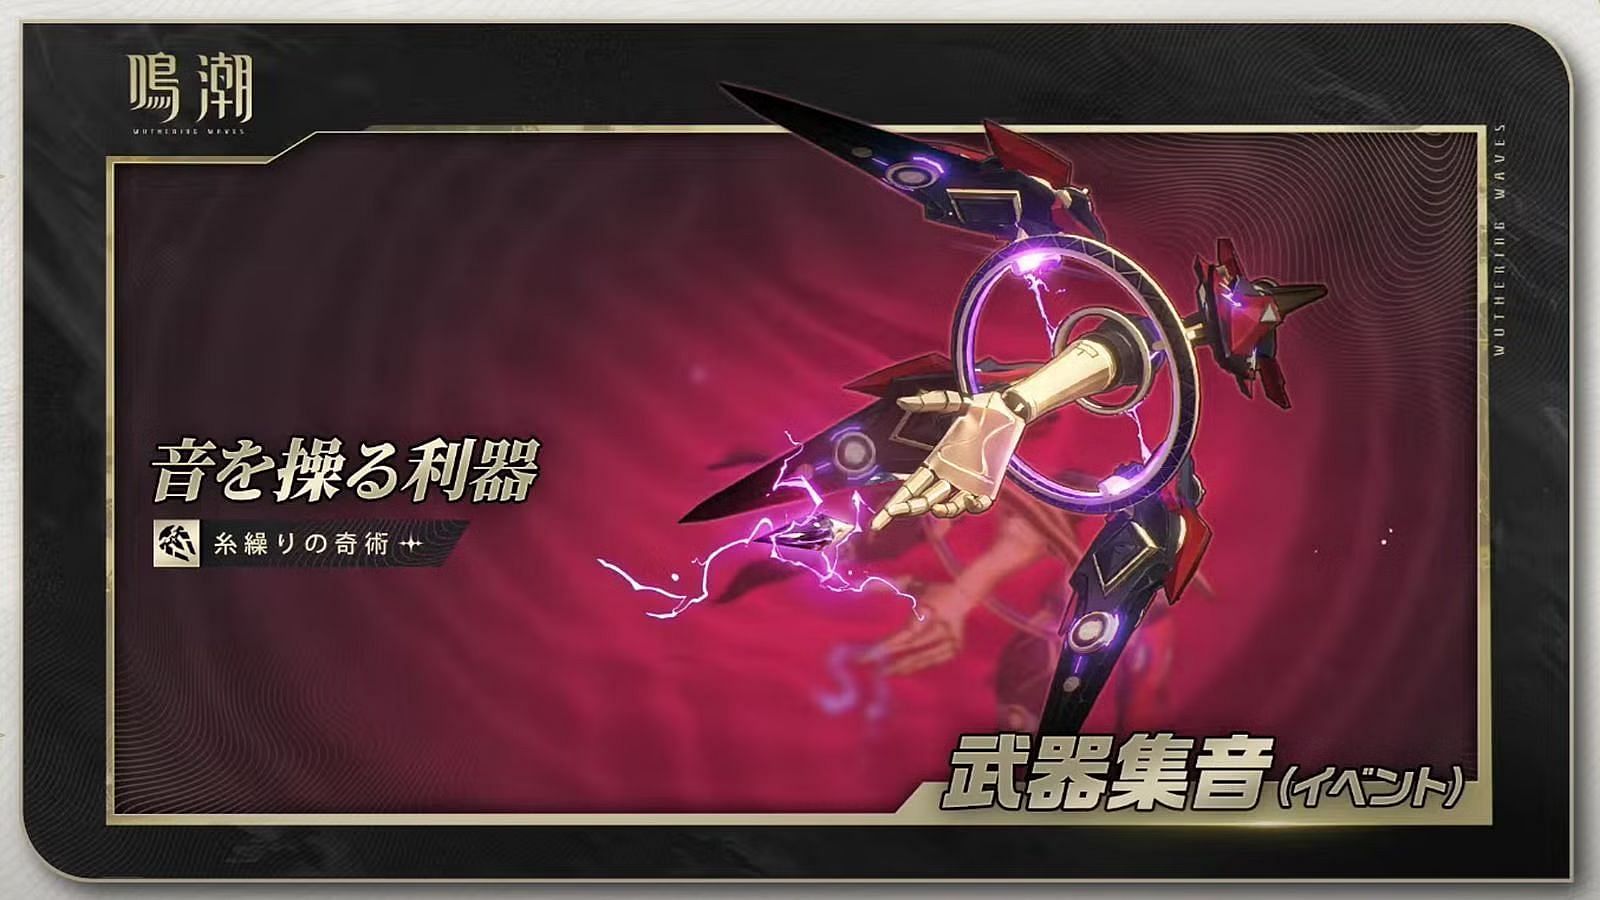 Stringmaster is a 5-star limited weapon (Image via Kuro Games)